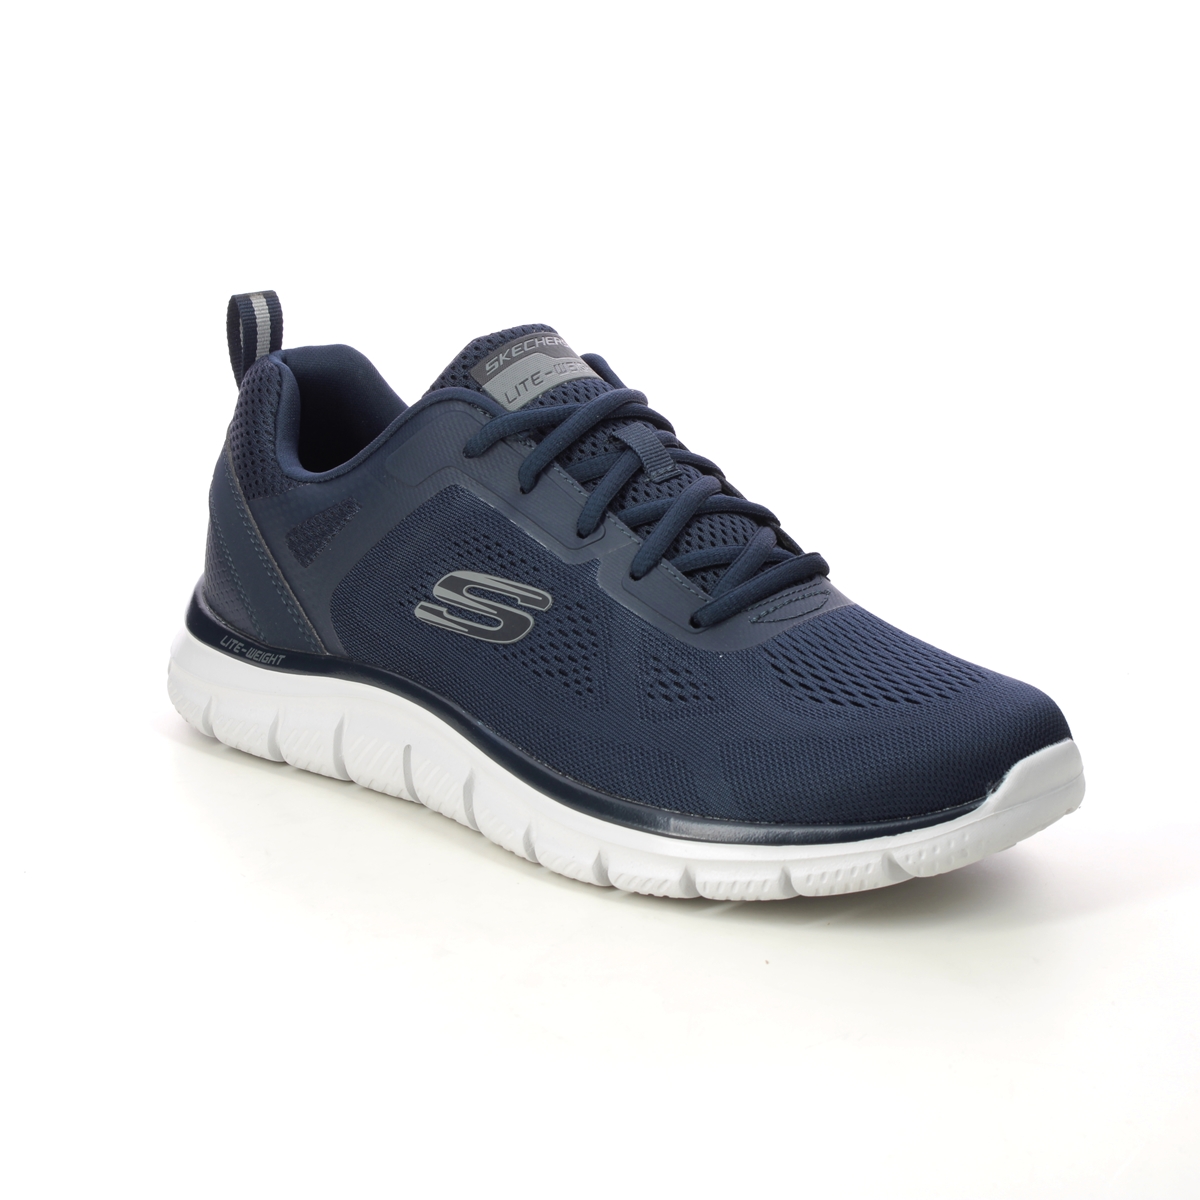 Skechers Track Broader NVY Navy Mens trainers 232698 in a Plain Textile in Size 7